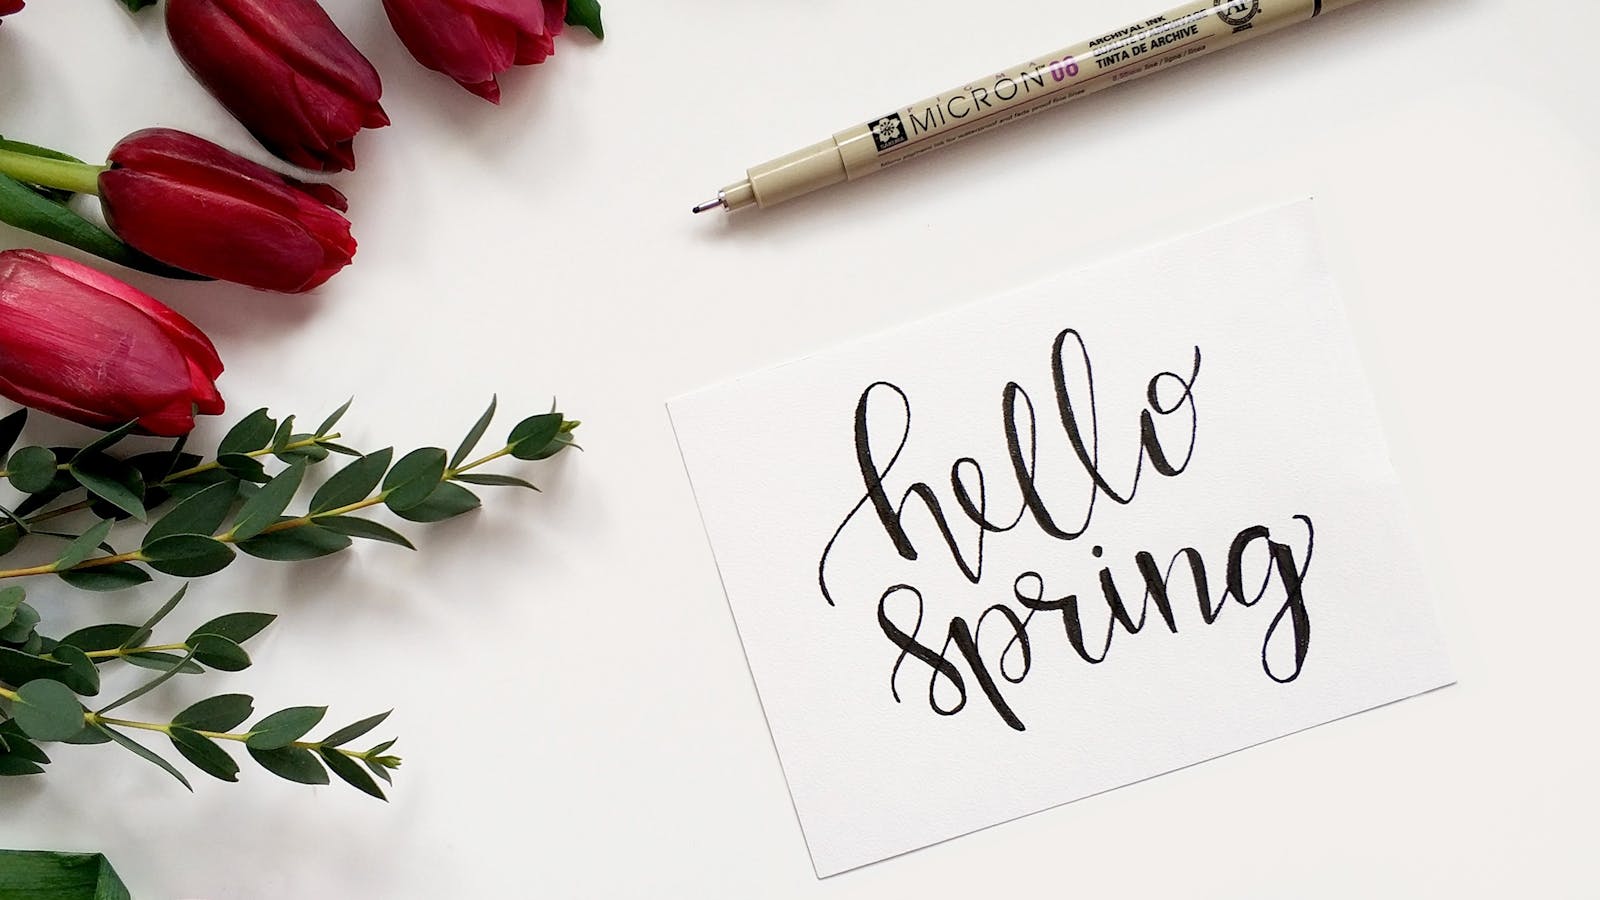 Image for Fun brush lettering calligraphy class